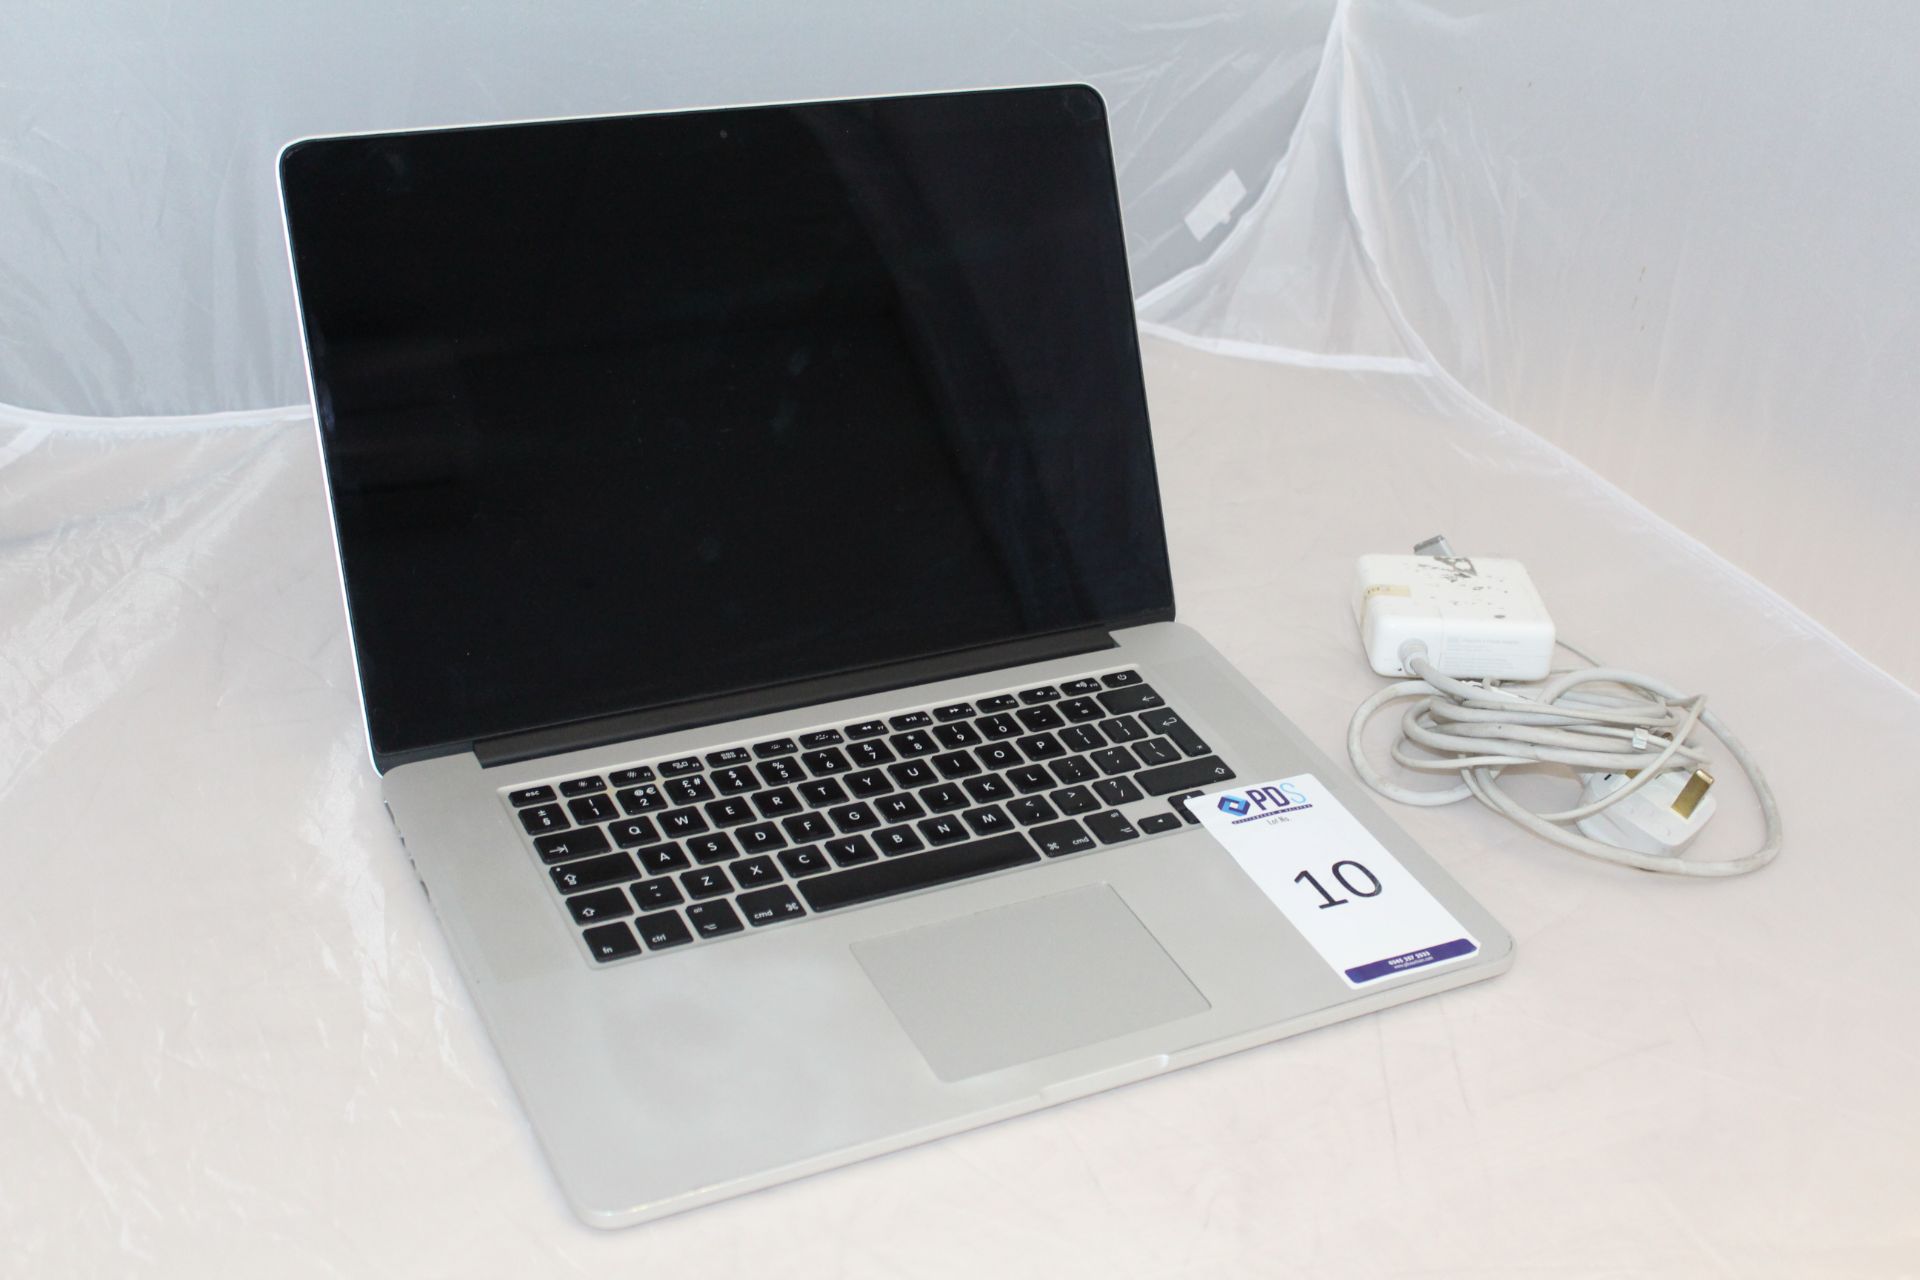 Apple MacBook Pro A1398, Serial Number CO2LP3H7FD57 with Charger